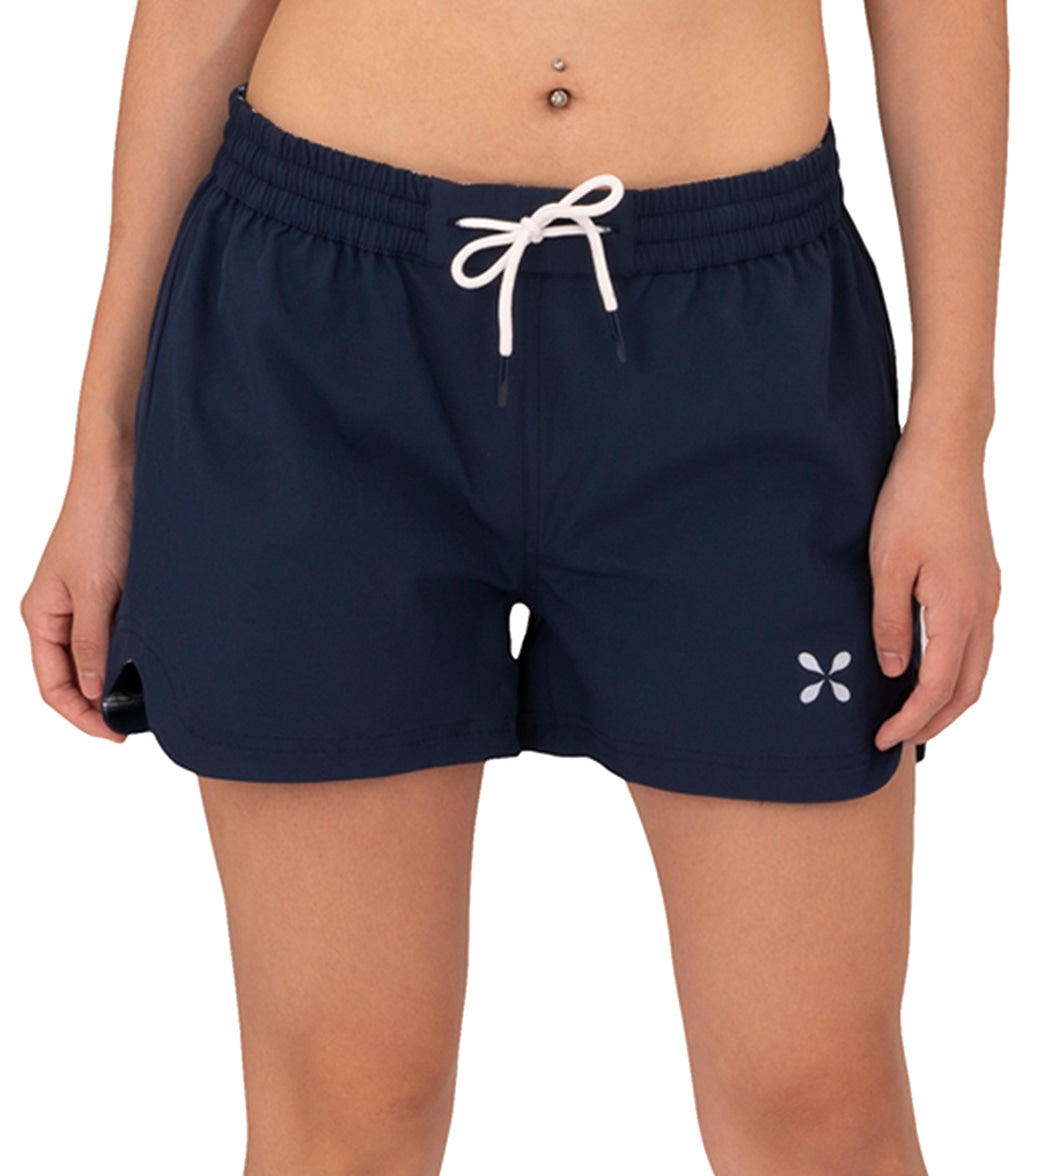 Level Six Women's Switched Reversible Short - Navy 10 - Swimoutlet.com